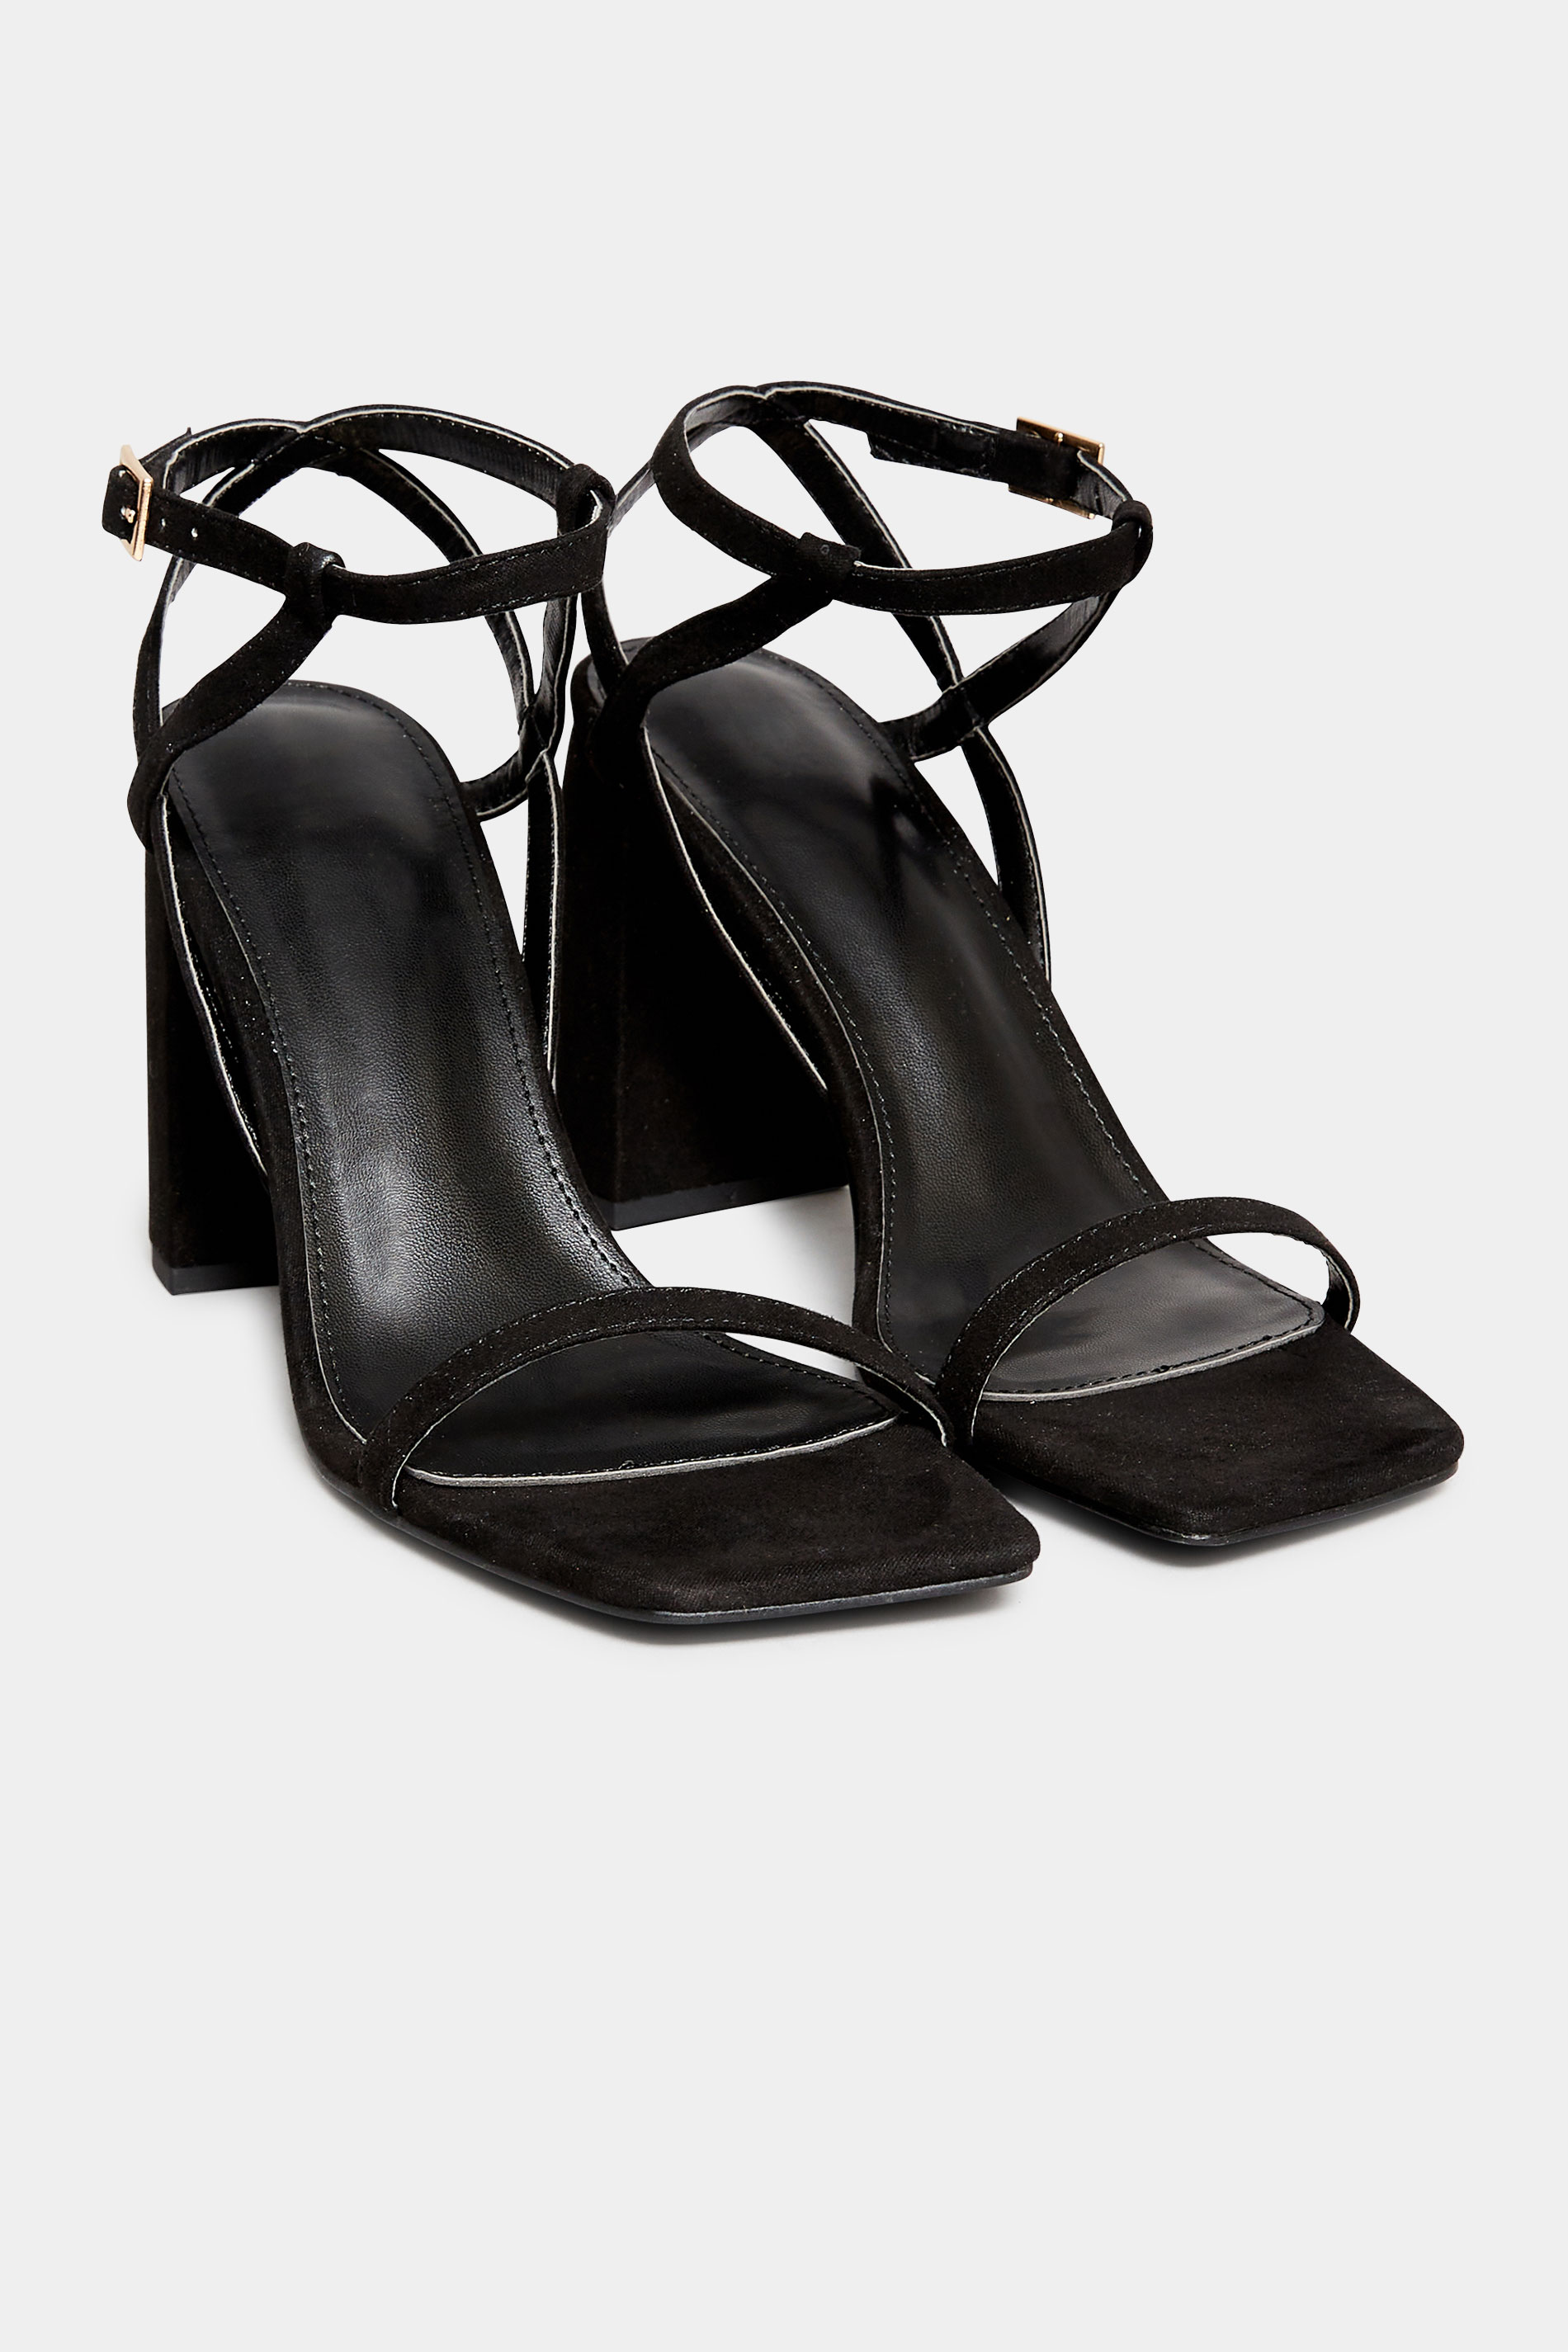 The Perfect Heels For Tall Girls | Long Tall Sally